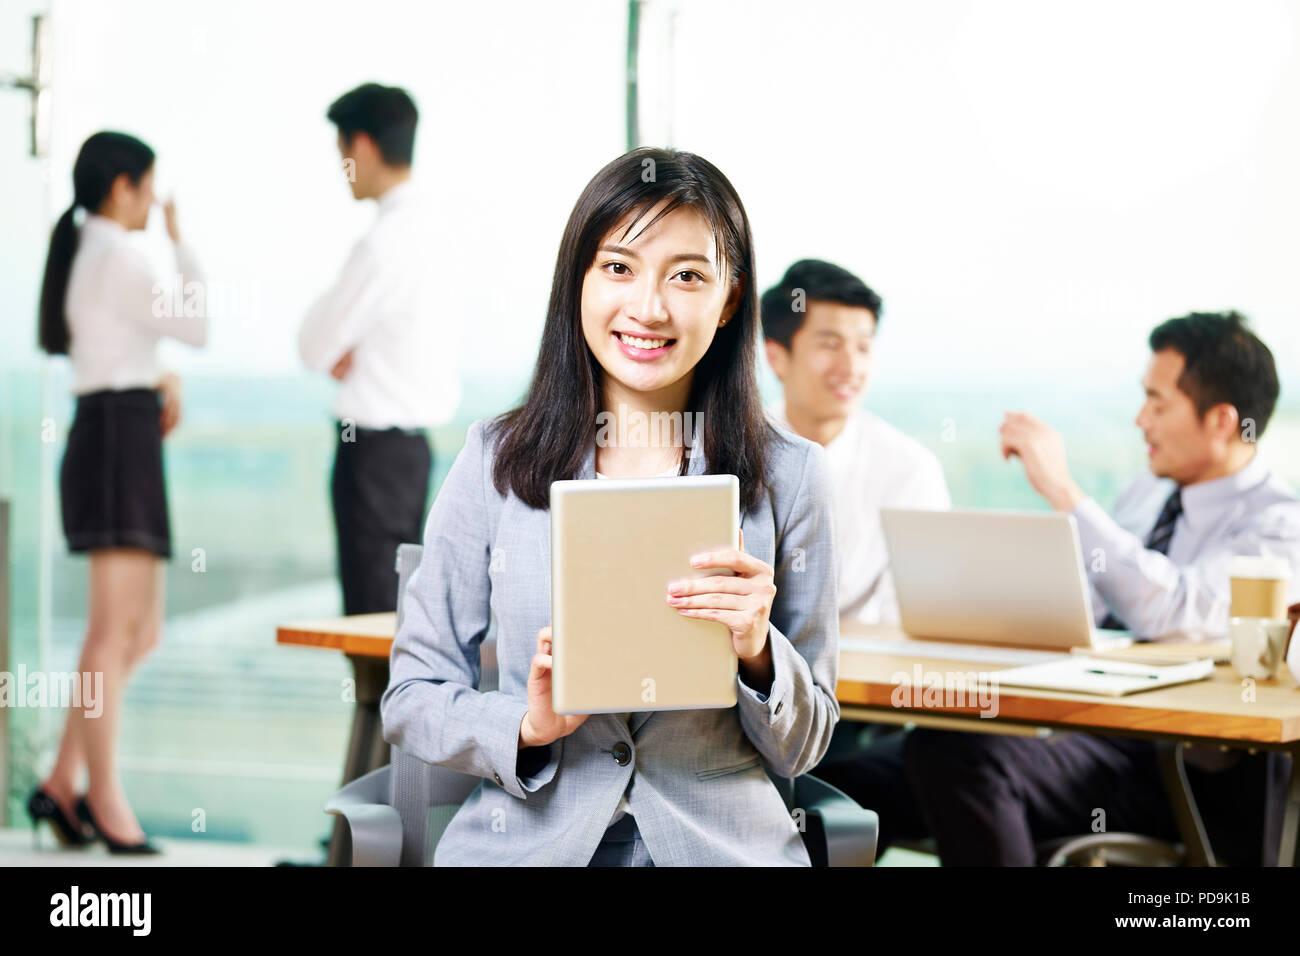 Portrait of young asian business woman holding digital tablet looking at camera smiling in office. Banque D'Images